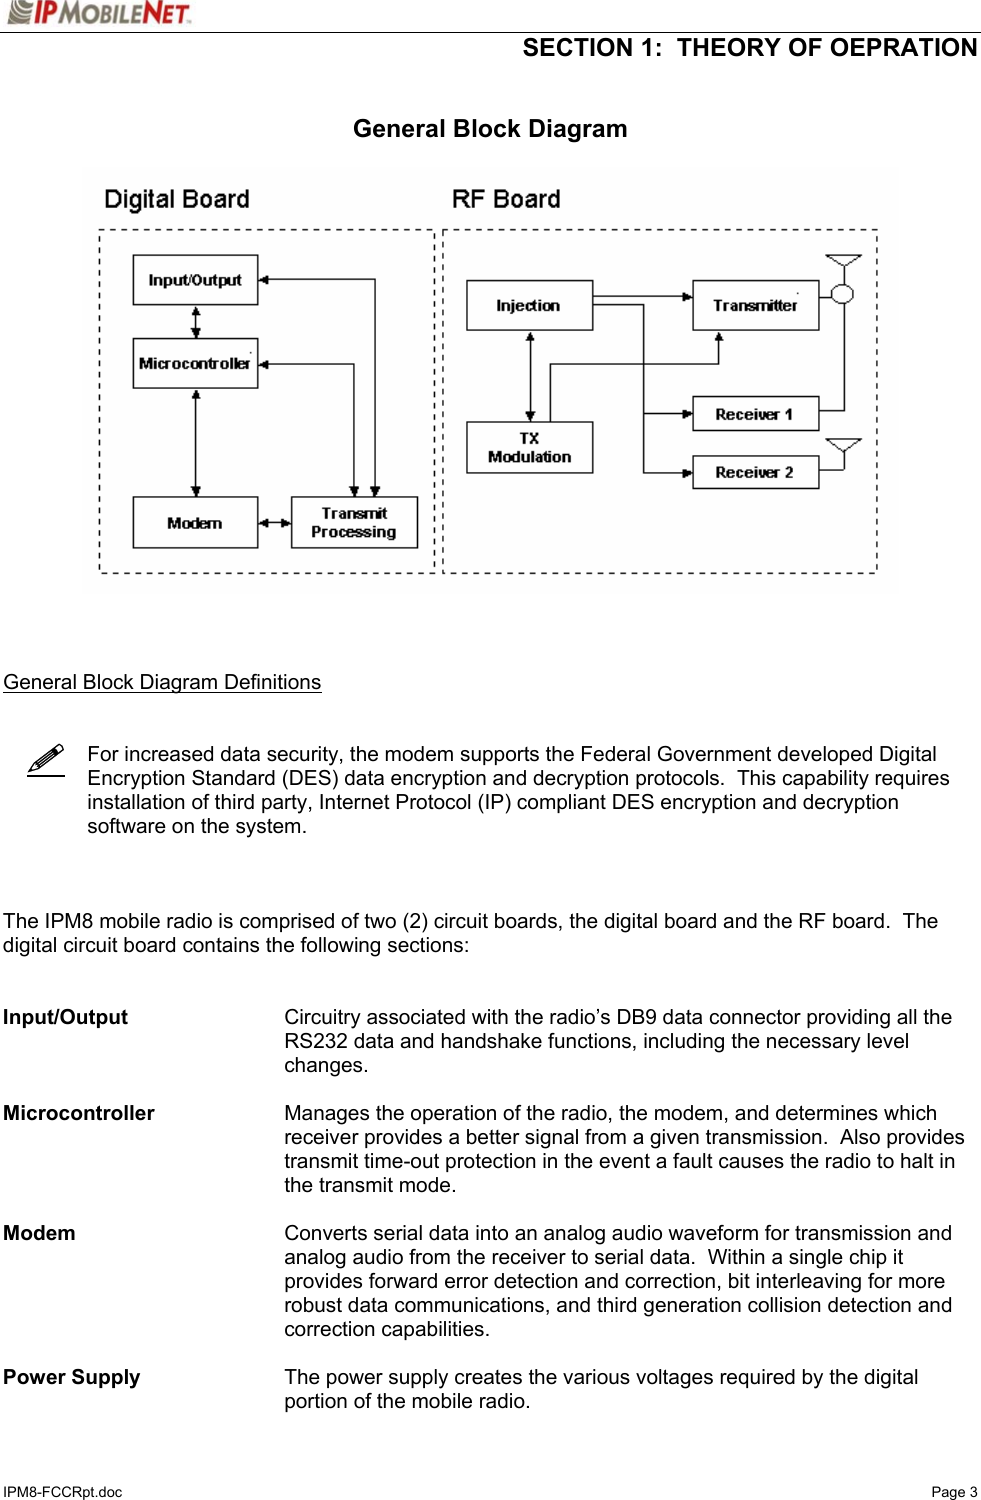   SECTION 1:  THEORY OF OEPRATION  IPM8-FCCRpt.doc   Page 3    General Block Diagram      General Block Diagram Definitions       For increased data security, the modem supports the Federal Government developed Digital Encryption Standard (DES) data encryption and decryption protocols.  This capability requires installation of third party, Internet Protocol (IP) compliant DES encryption and decryption software on the system.    The IPM8 mobile radio is comprised of two (2) circuit boards, the digital board and the RF board.  The digital circuit board contains the following sections:   Input/Output  Circuitry associated with the radio’s DB9 data connector providing all the RS232 data and handshake functions, including the necessary level changes.   Microcontroller  Manages the operation of the radio, the modem, and determines which receiver provides a better signal from a given transmission.  Also provides transmit time-out protection in the event a fault causes the radio to halt in the transmit mode.  Modem  Converts serial data into an analog audio waveform for transmission and analog audio from the receiver to serial data.  Within a single chip it provides forward error detection and correction, bit interleaving for more robust data communications, and third generation collision detection and correction capabilities.  Power Supply  The power supply creates the various voltages required by the digital portion of the mobile radio.